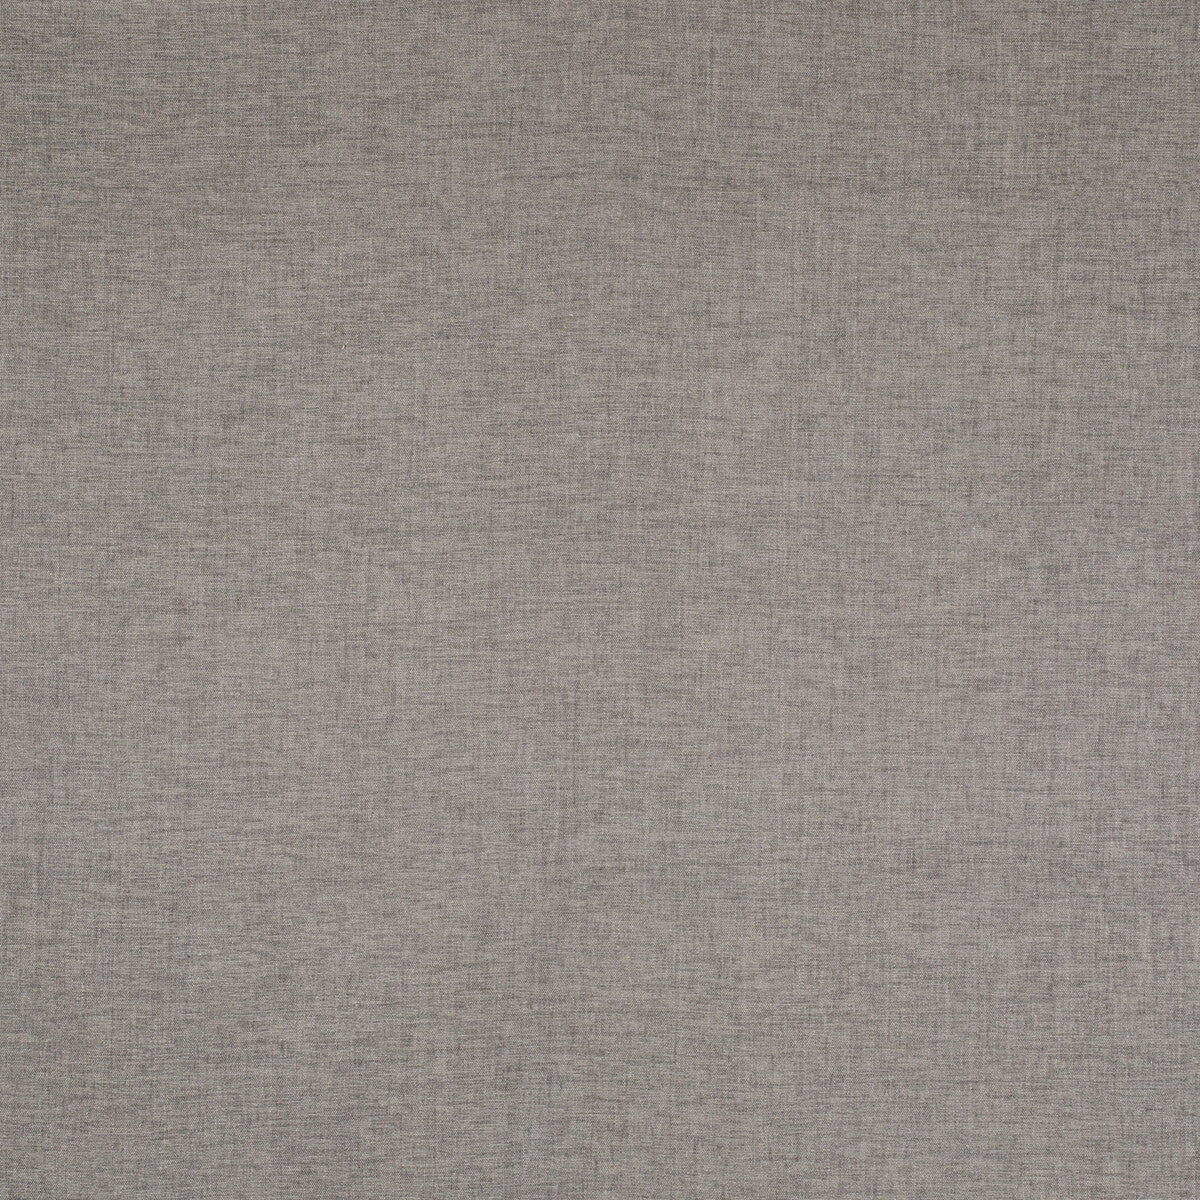 Kravet Smart fabric in 36095-611 color - pattern 36095.611.0 - by Kravet Smart in the Eco-Friendly Chenille collection